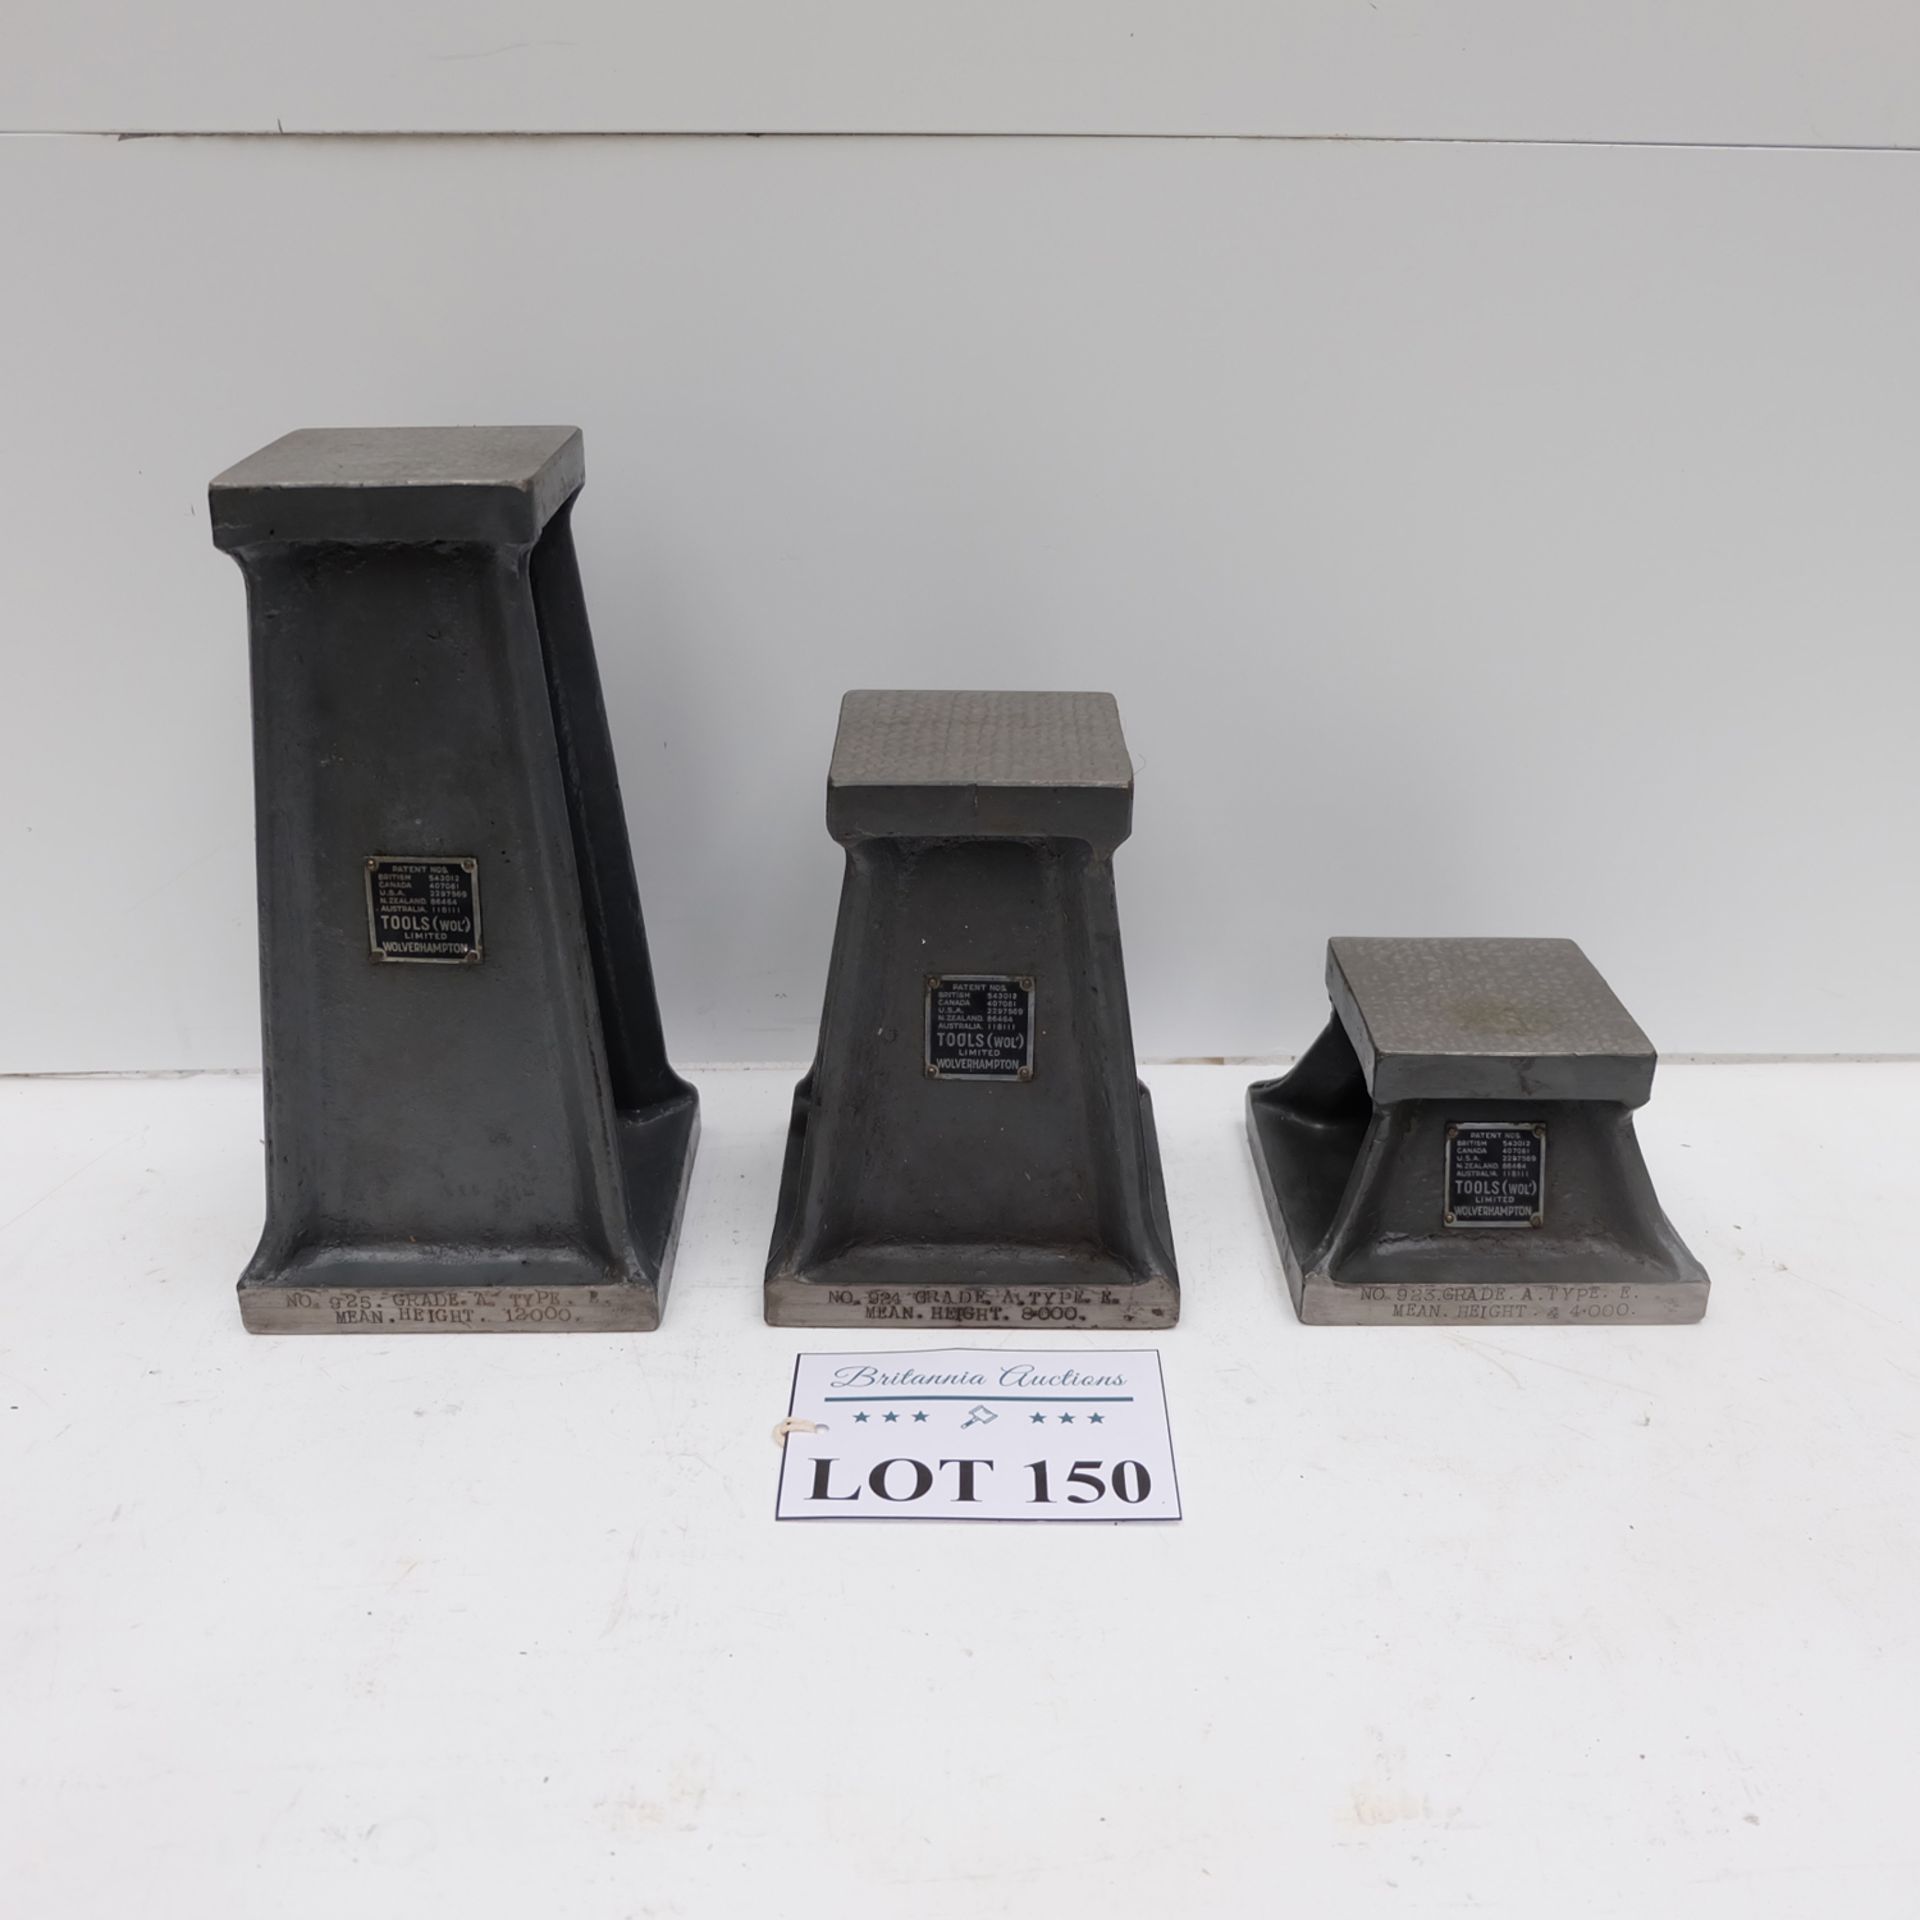 3 x Tools (Wol) Ltd. Height Gauge Extension Towers. - Image 3 of 11